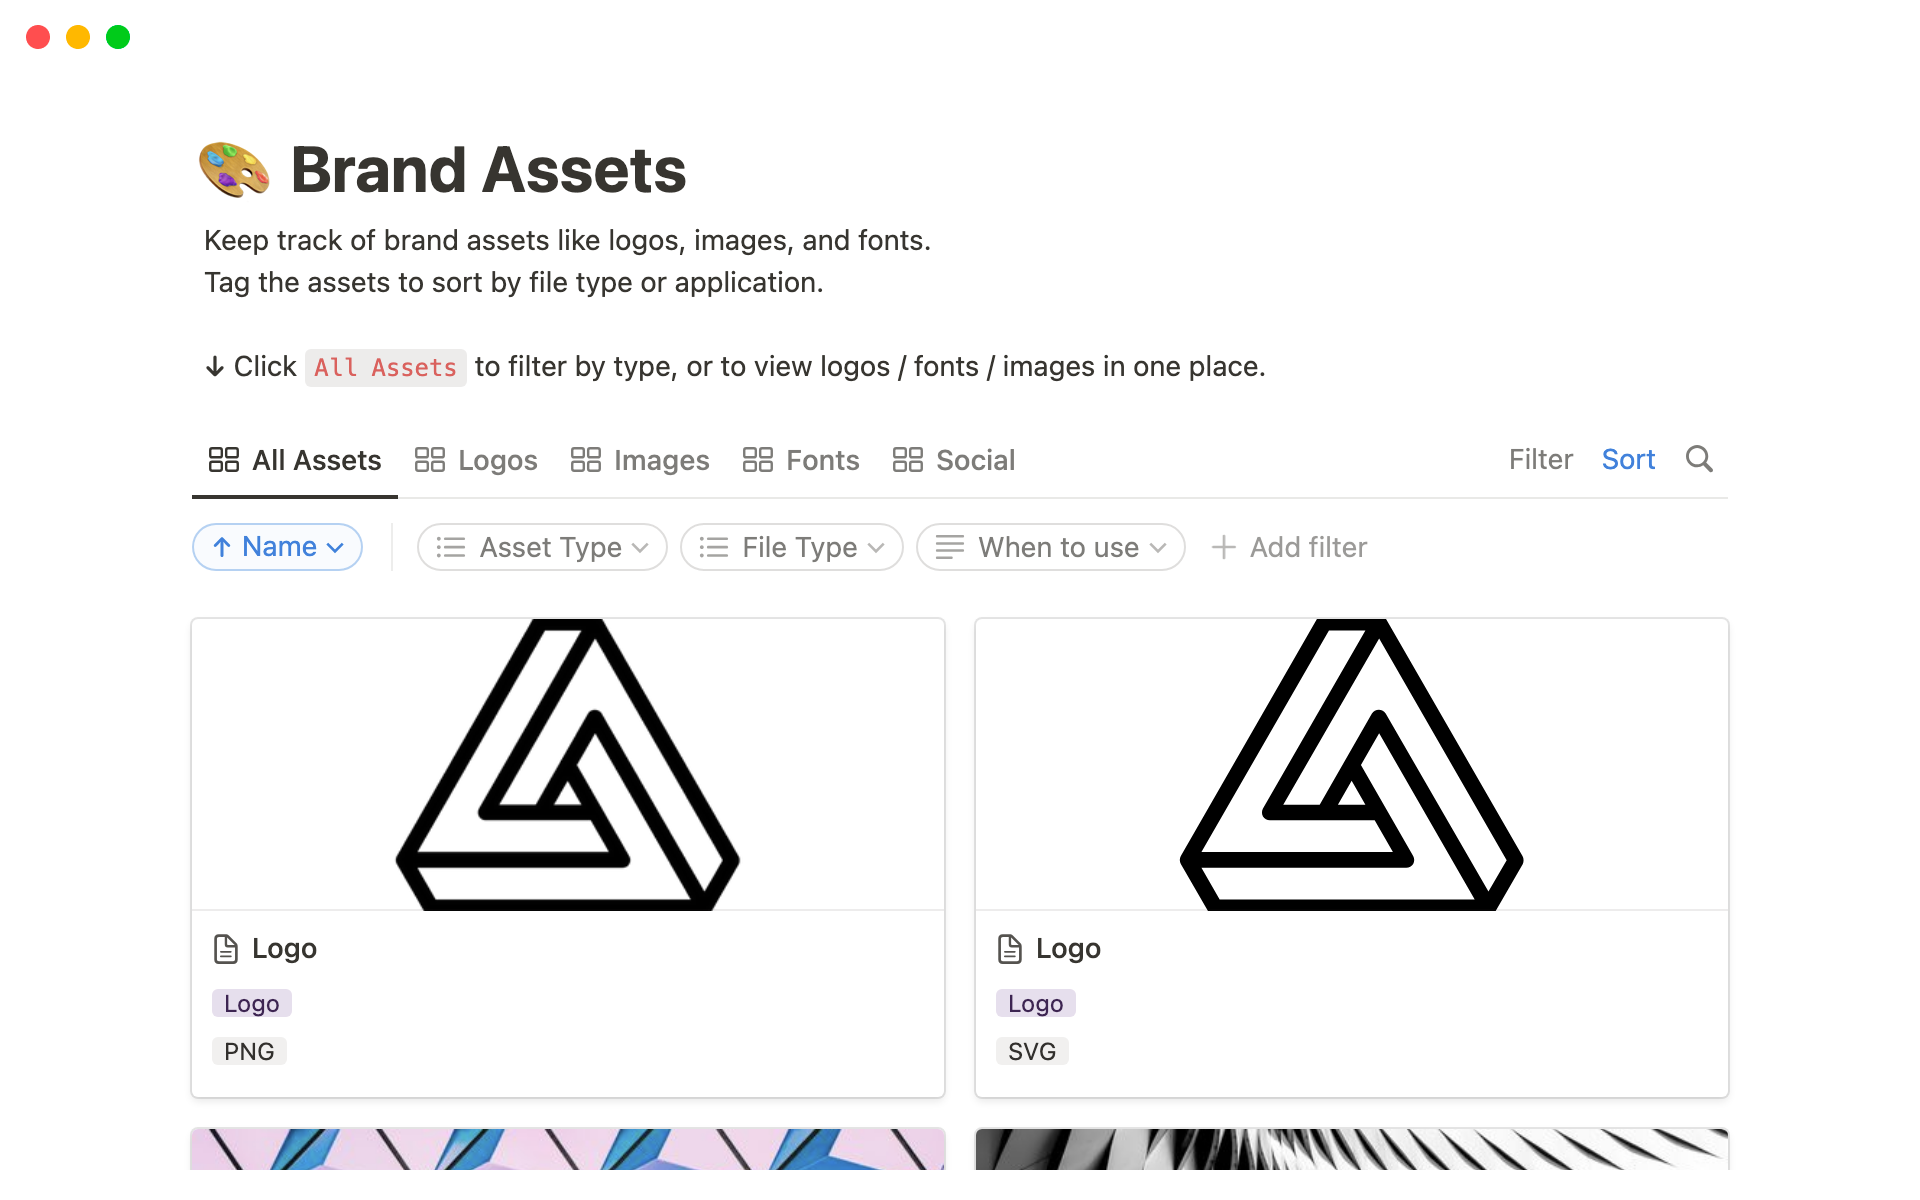 Keep track of brand assets like logos, images, and fonts.